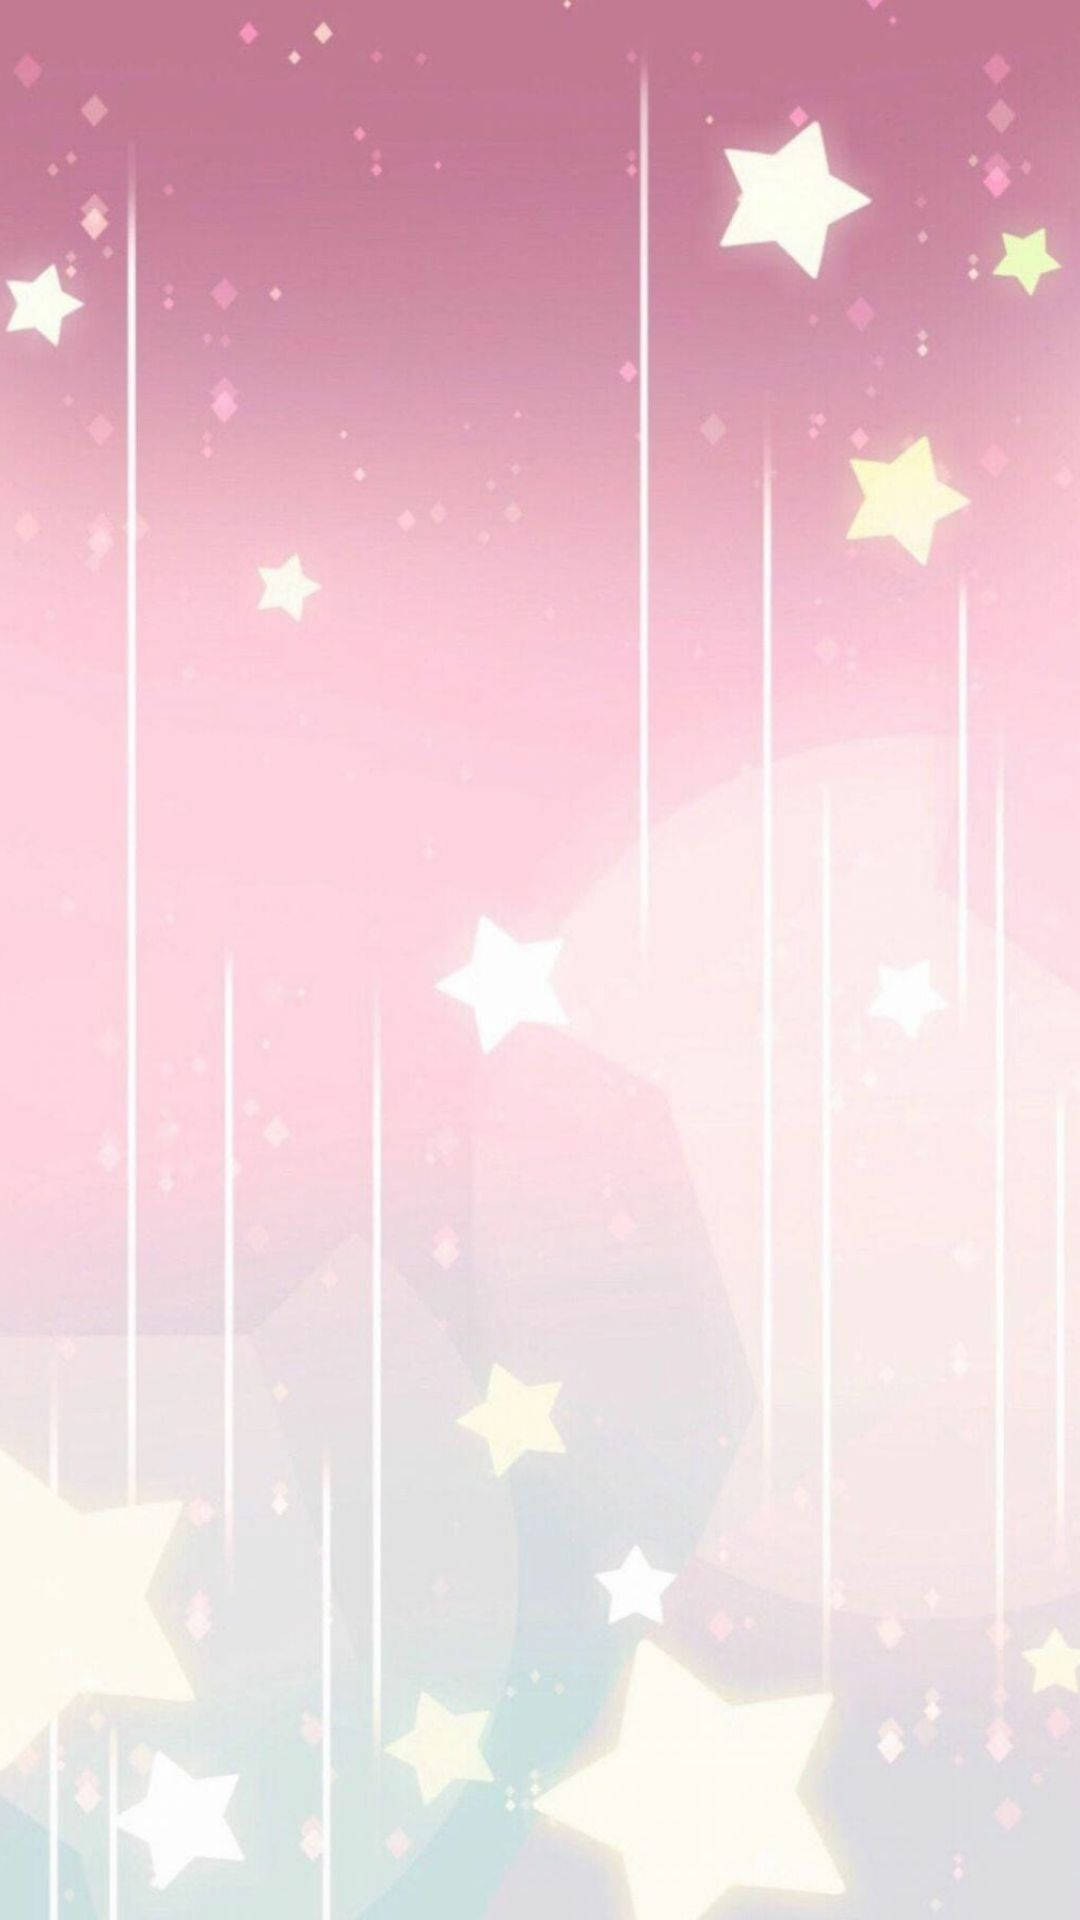 Falling Stars In Aesthetic Pink Sky Picture